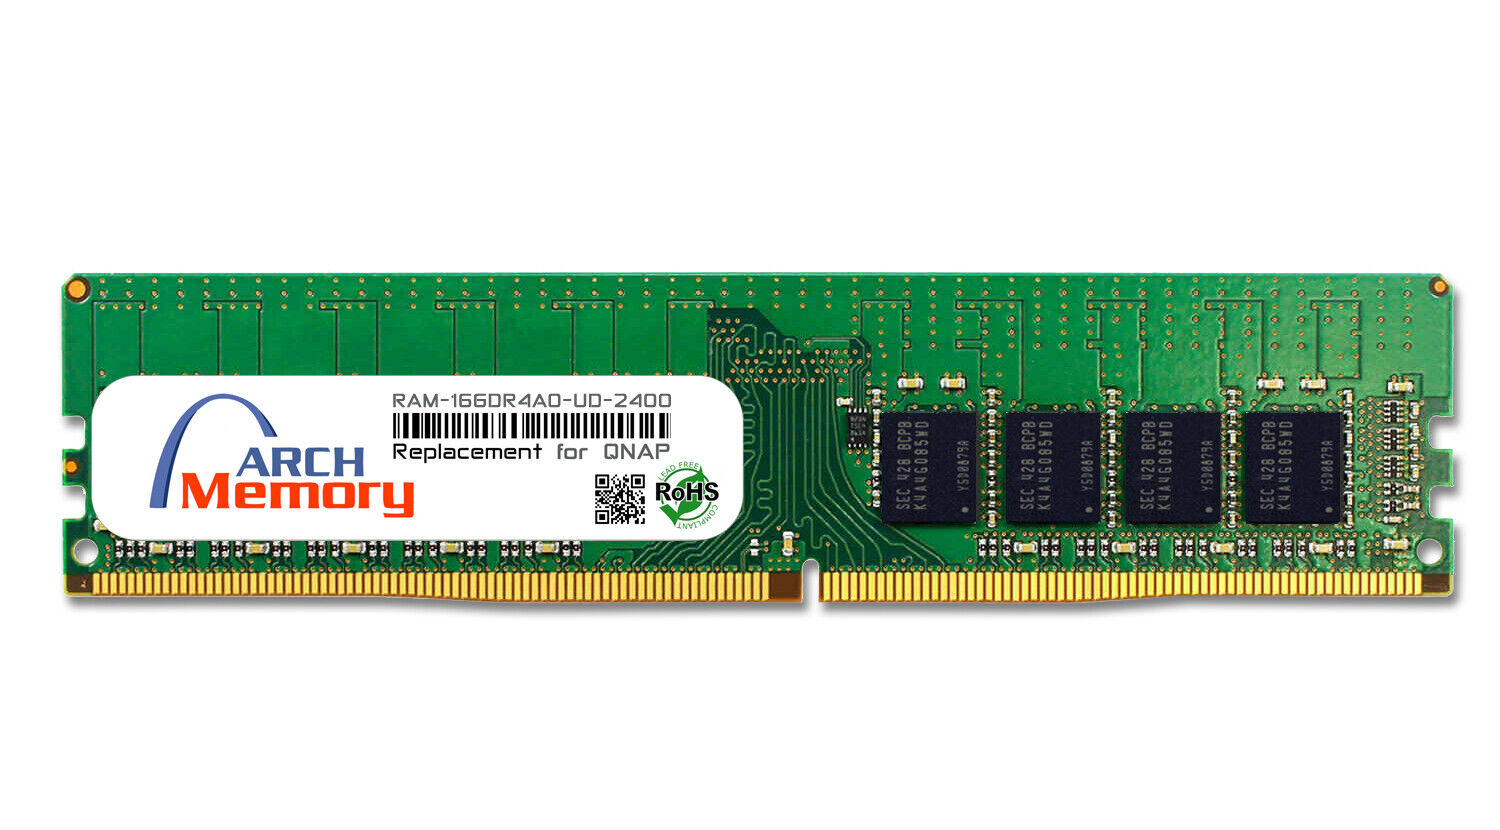 16GB RAM-16GDR4A0-UD-2400 DDR4-2400 288-Pin UDIMM RAM Memory for QNAP